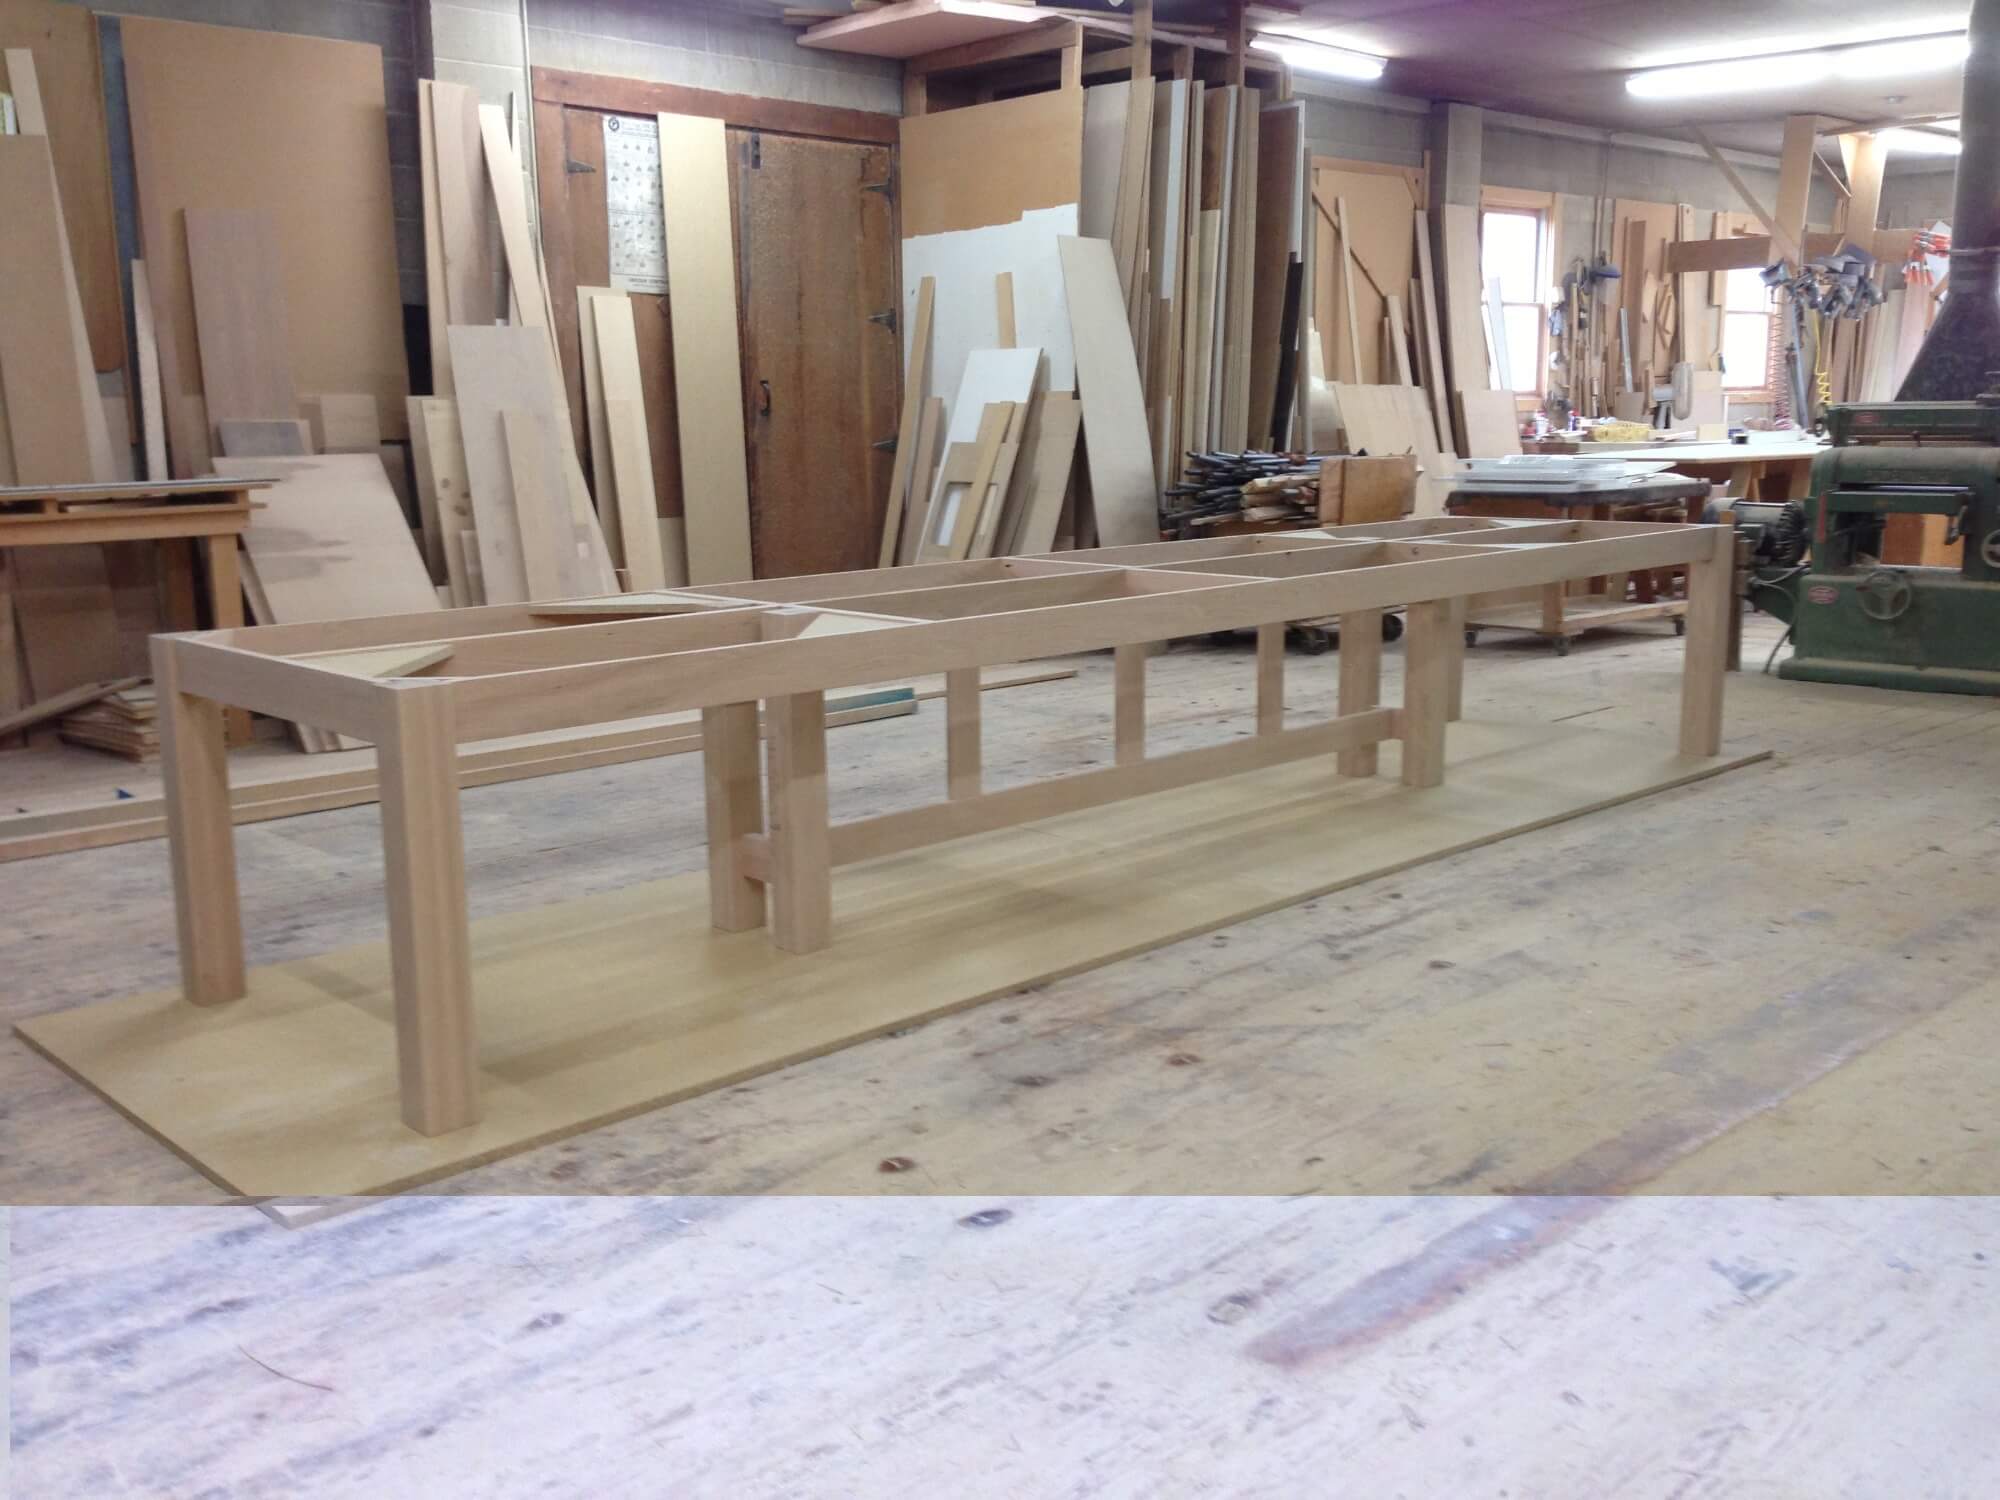 Early Cabinet Frame Construction